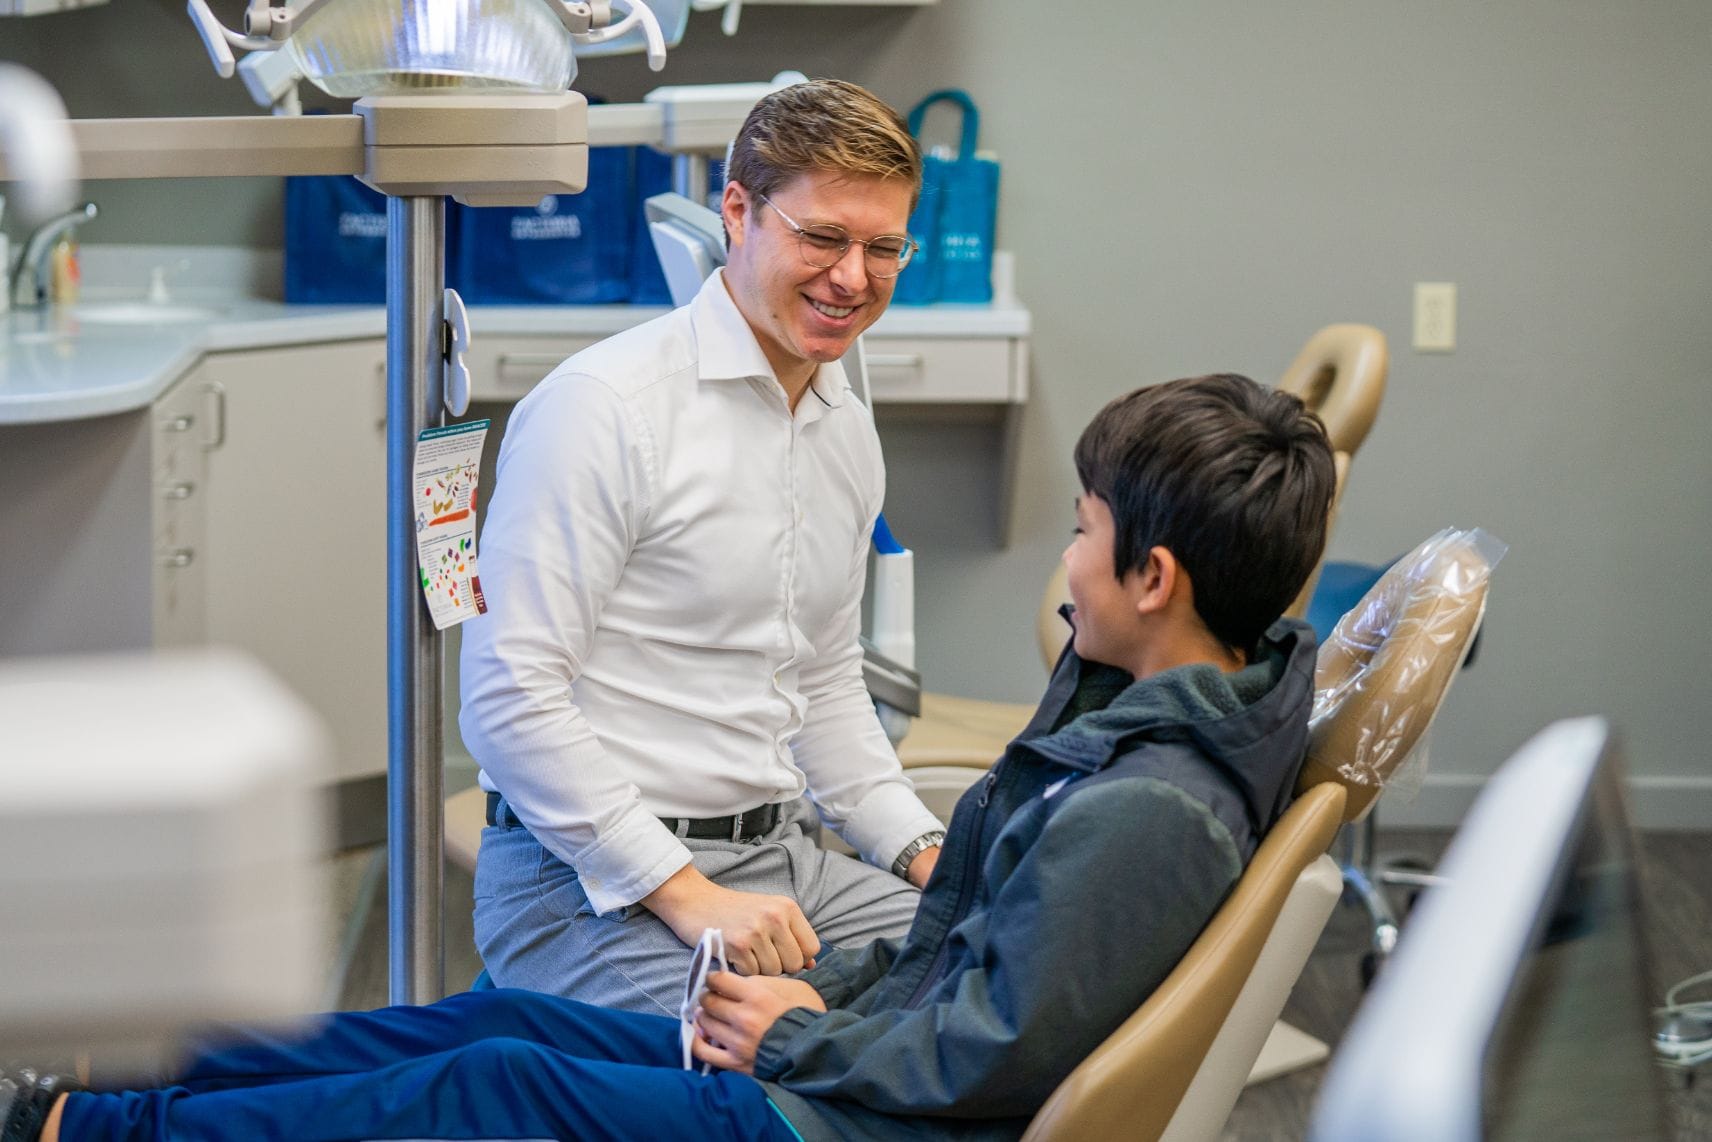 Dr. Adam talking to a young boy patient in a treatment chair.